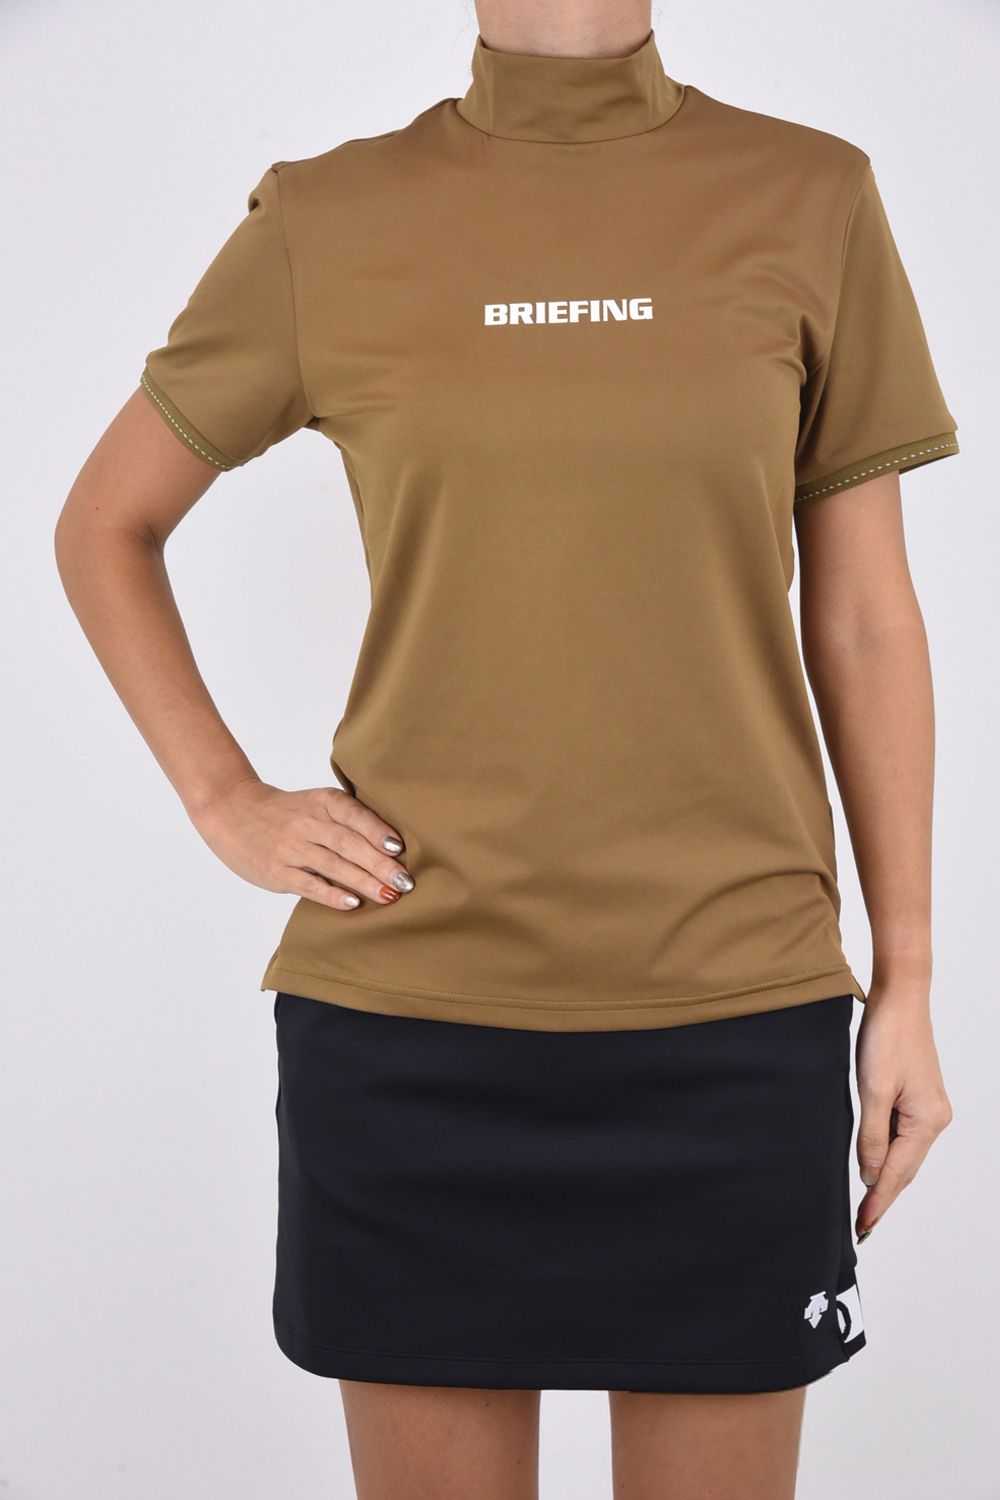 BRIEFING - WOMENS TOUR HIGH NECK / BRIEFINGロゴ ハイネックシャツ ...